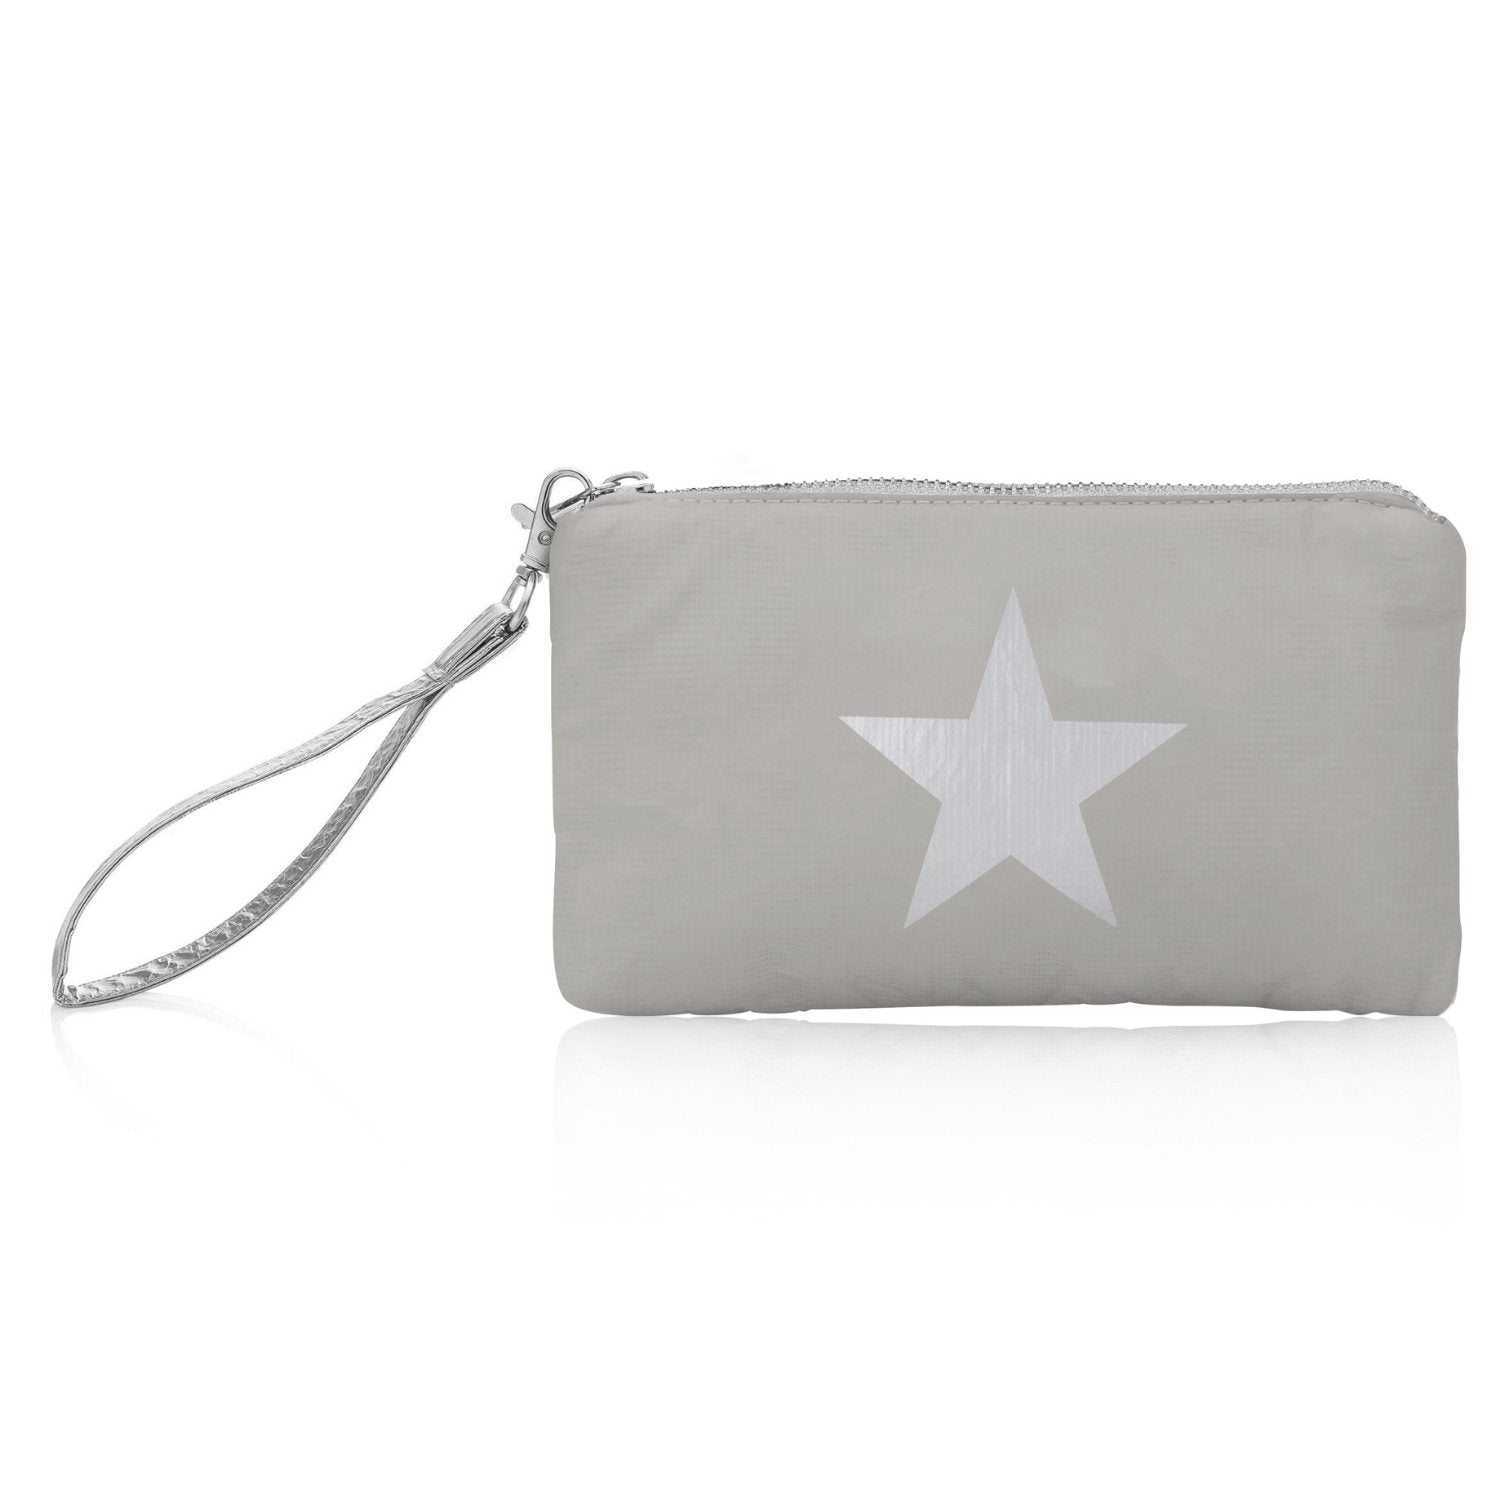 zip wristlet in gray with silver star